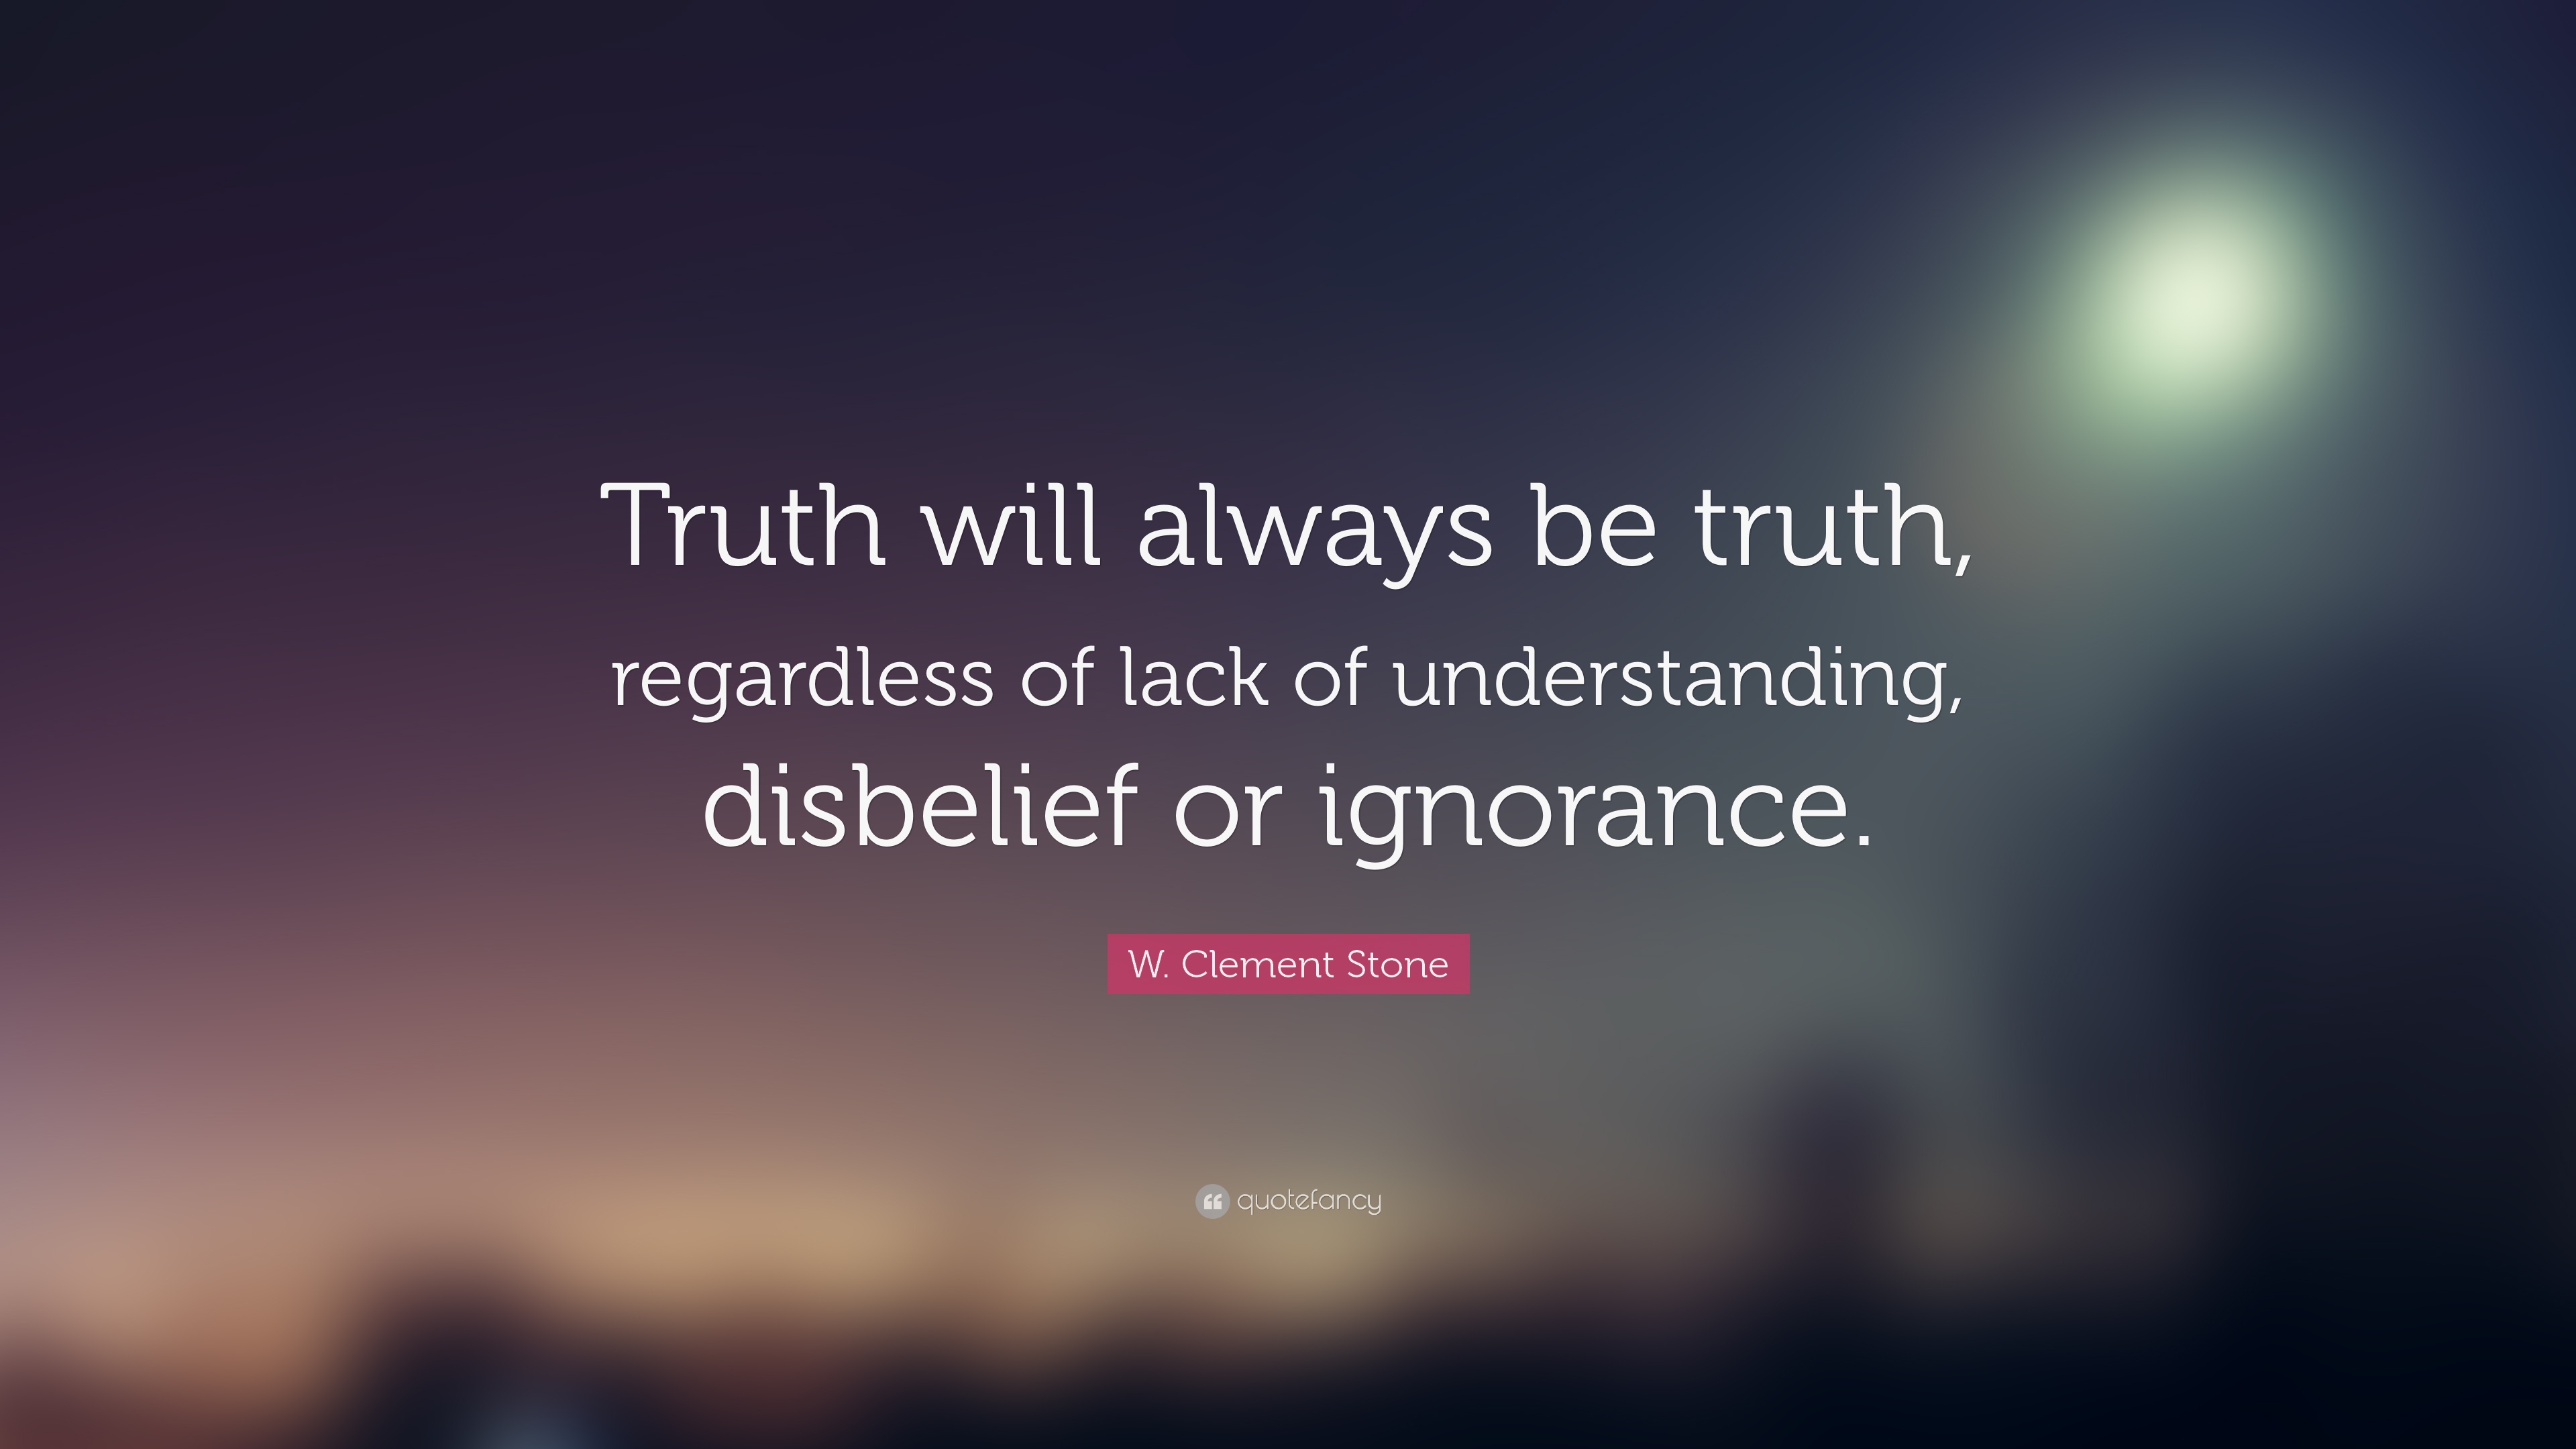 W. Clement Stone Quote: “Truth will always be truth, regardless of ...